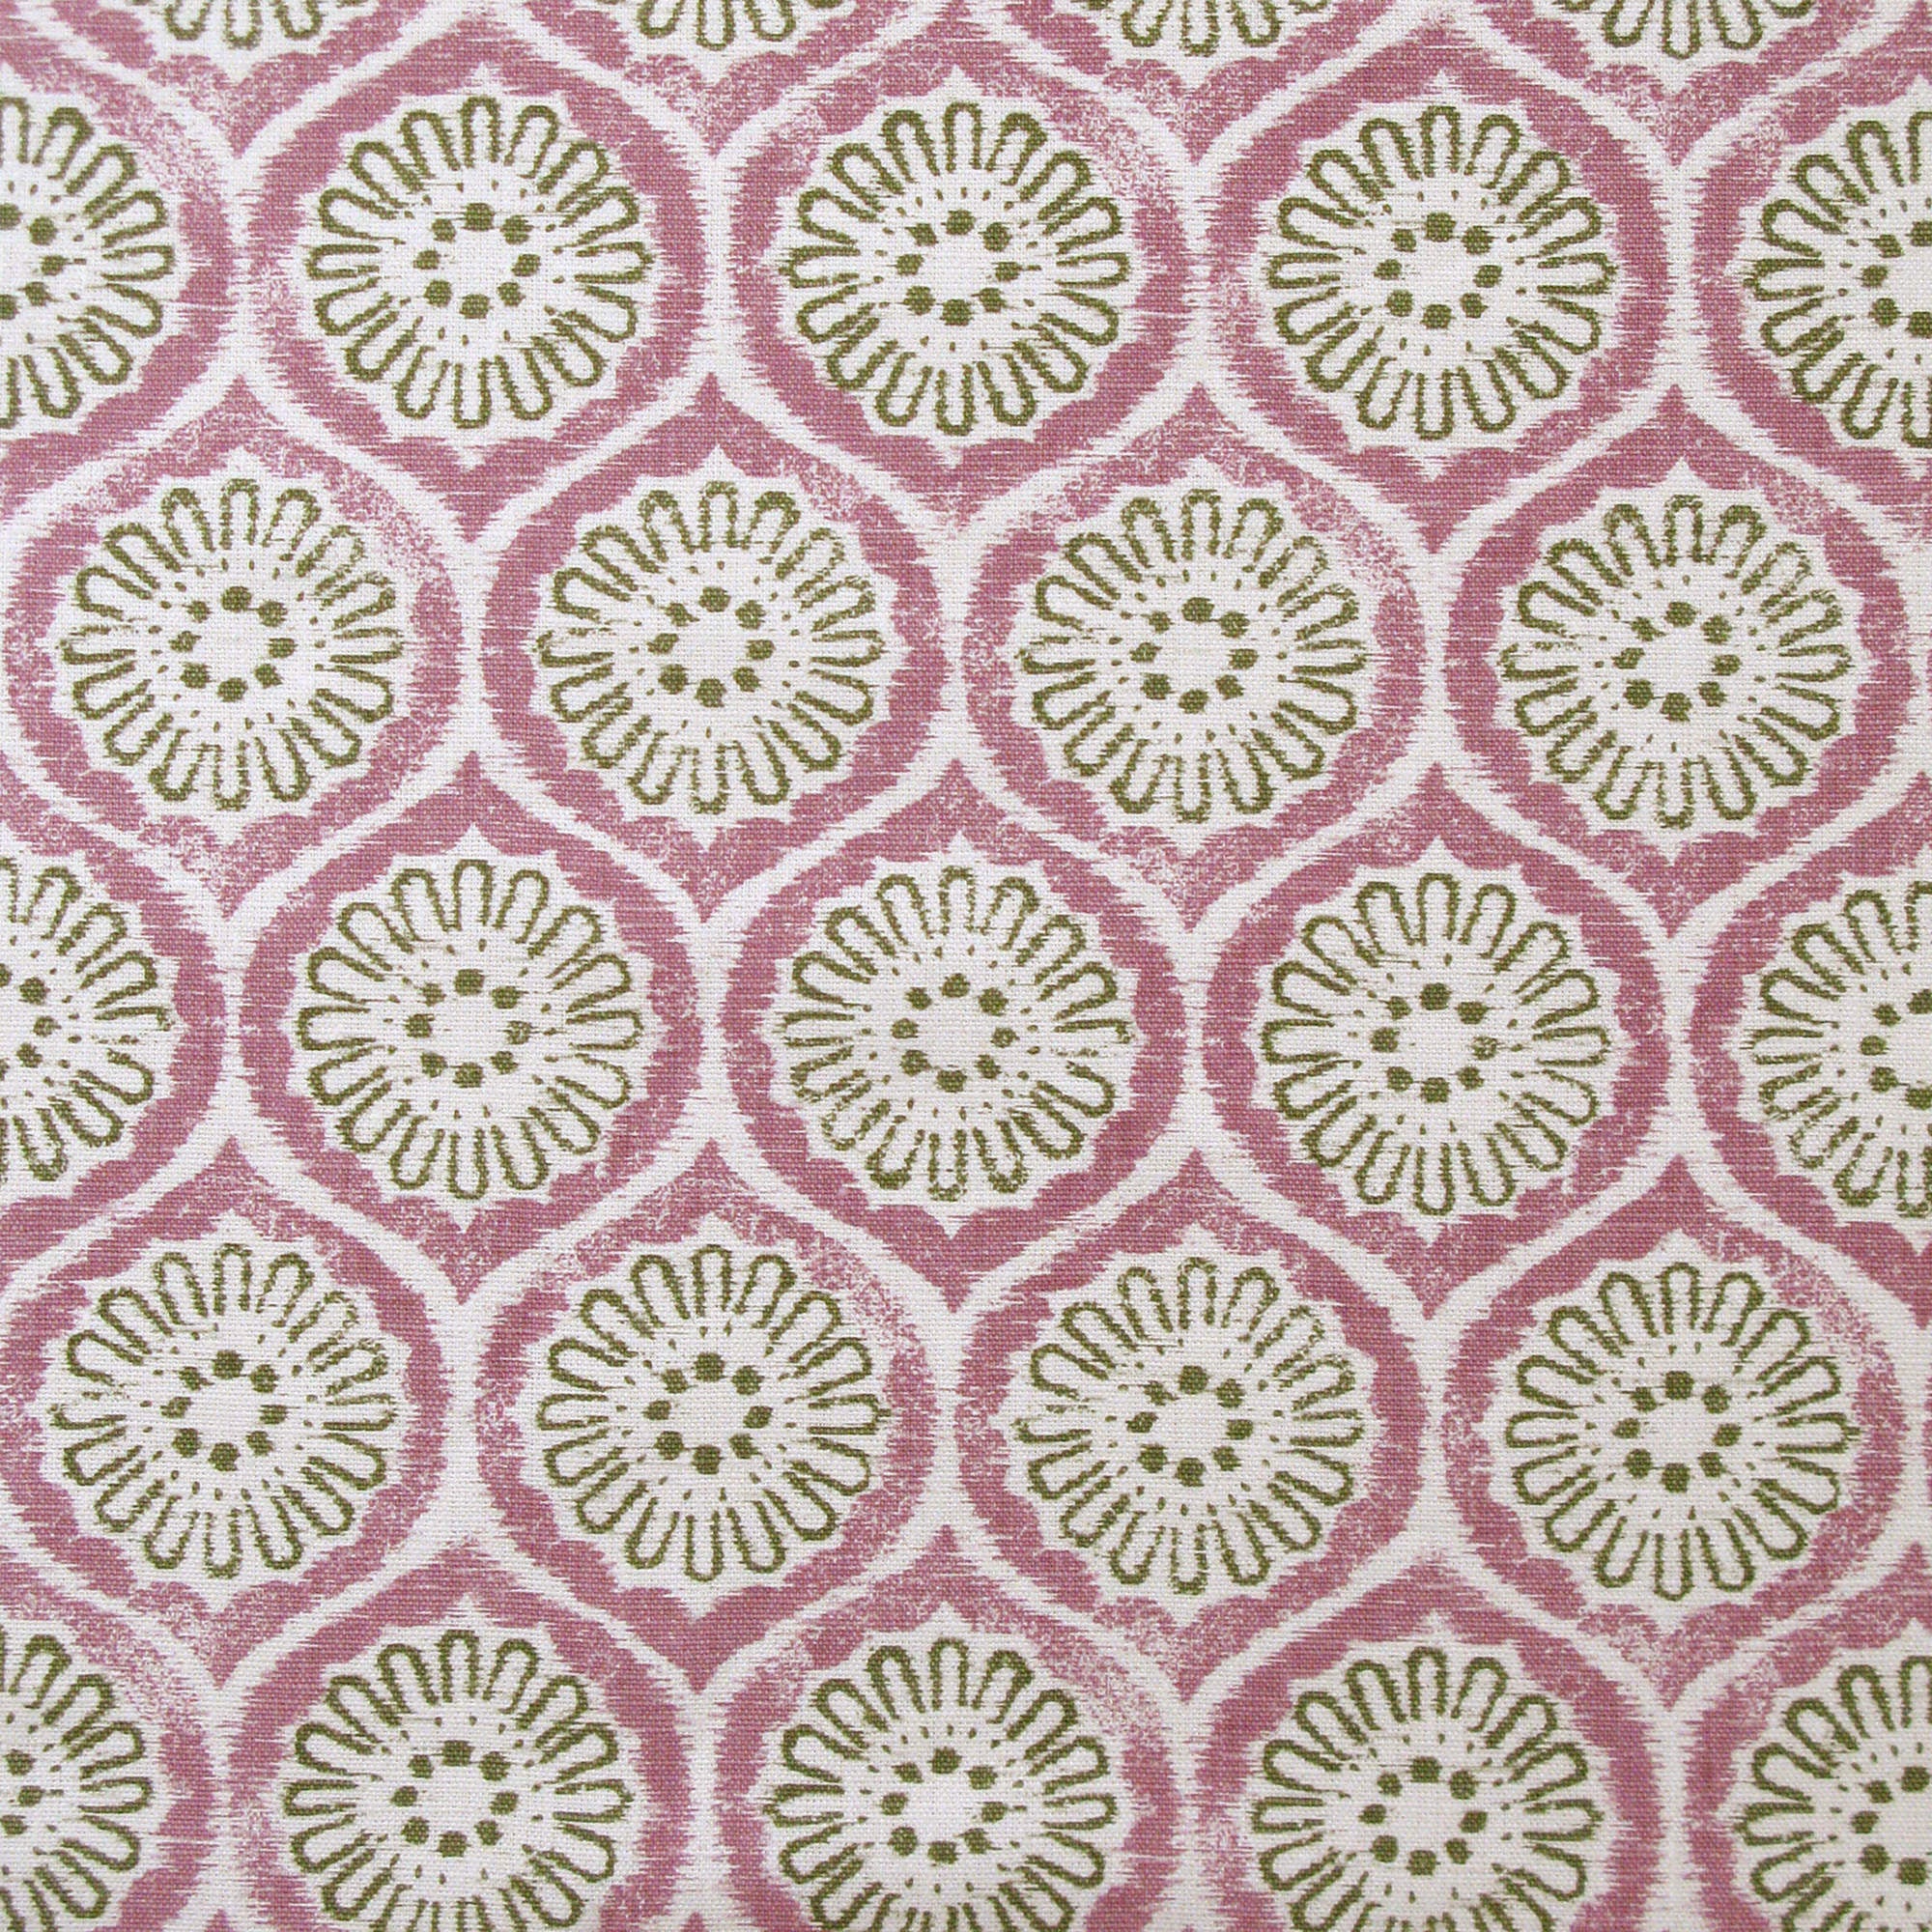 Detail of fabric in a floral lattice print in green and pink on a cream field.